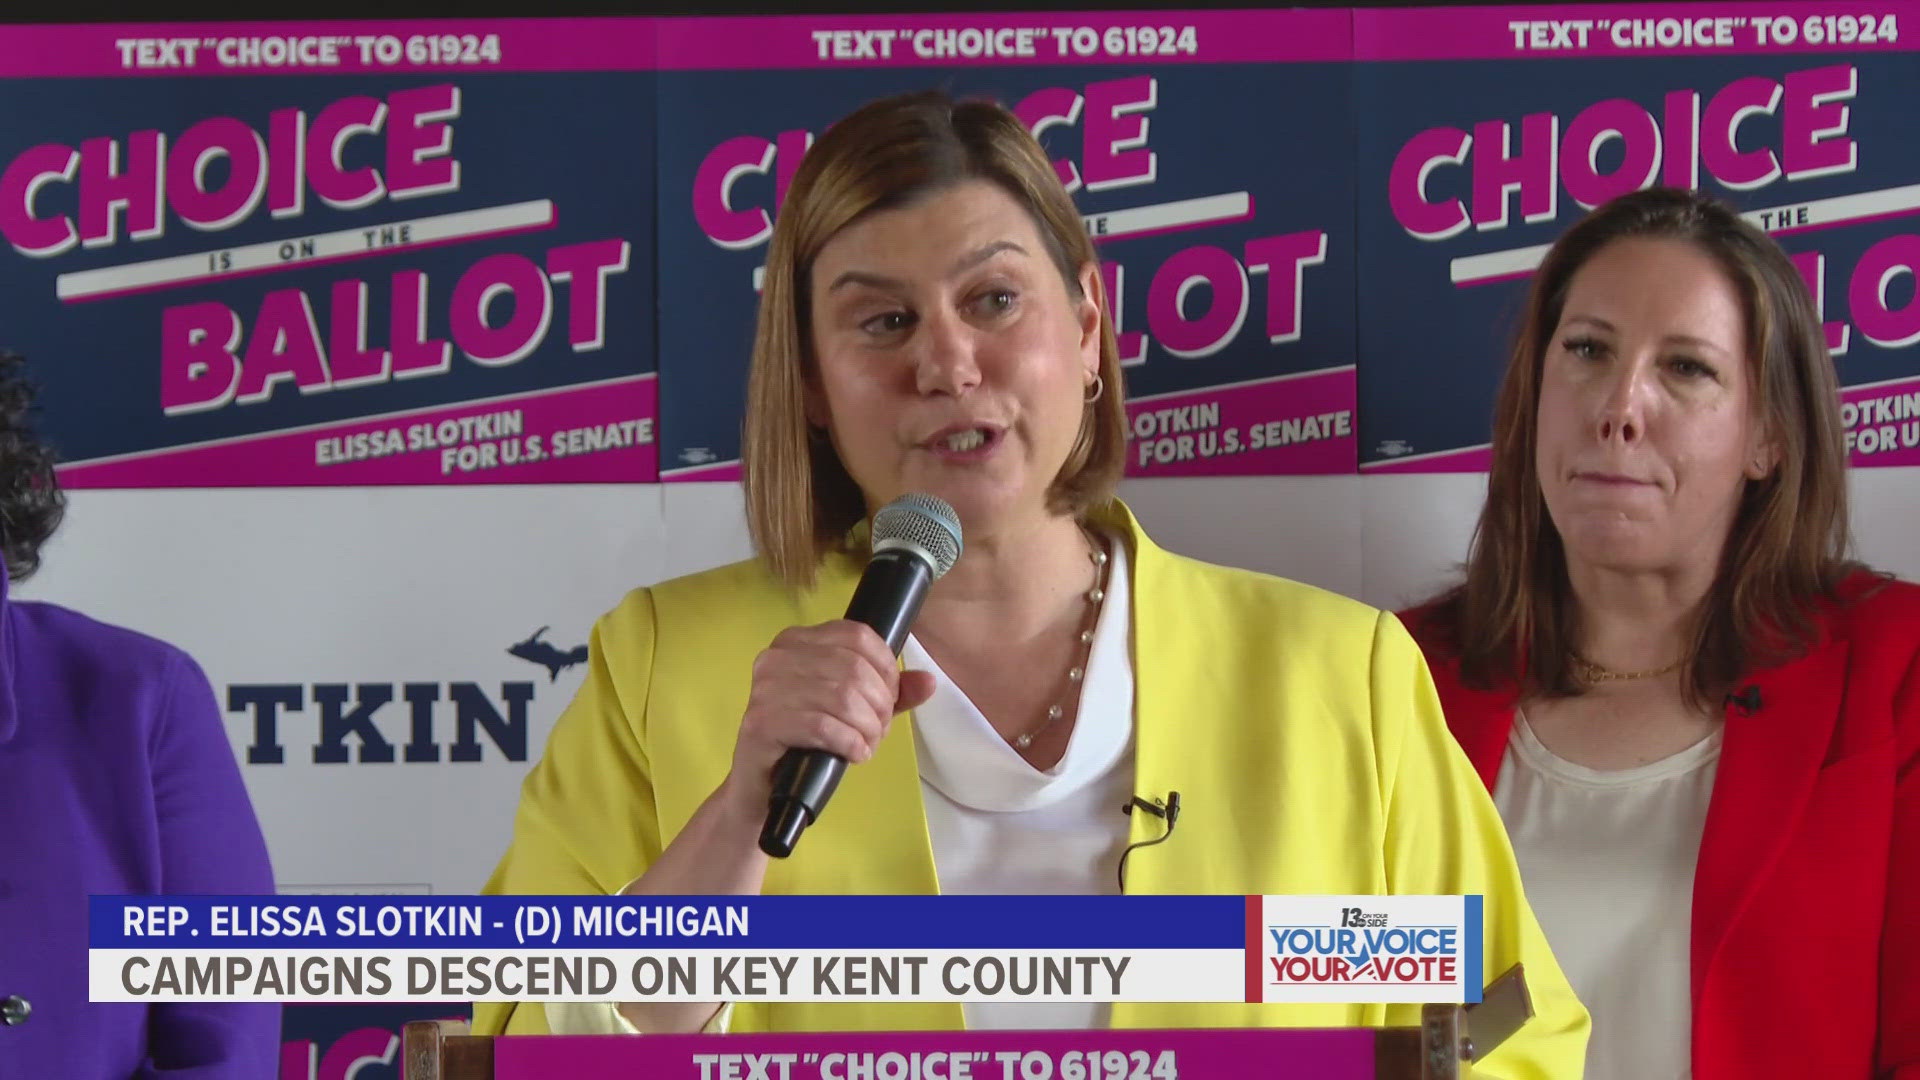 As elections approach, campaigns are descending on Kent County.